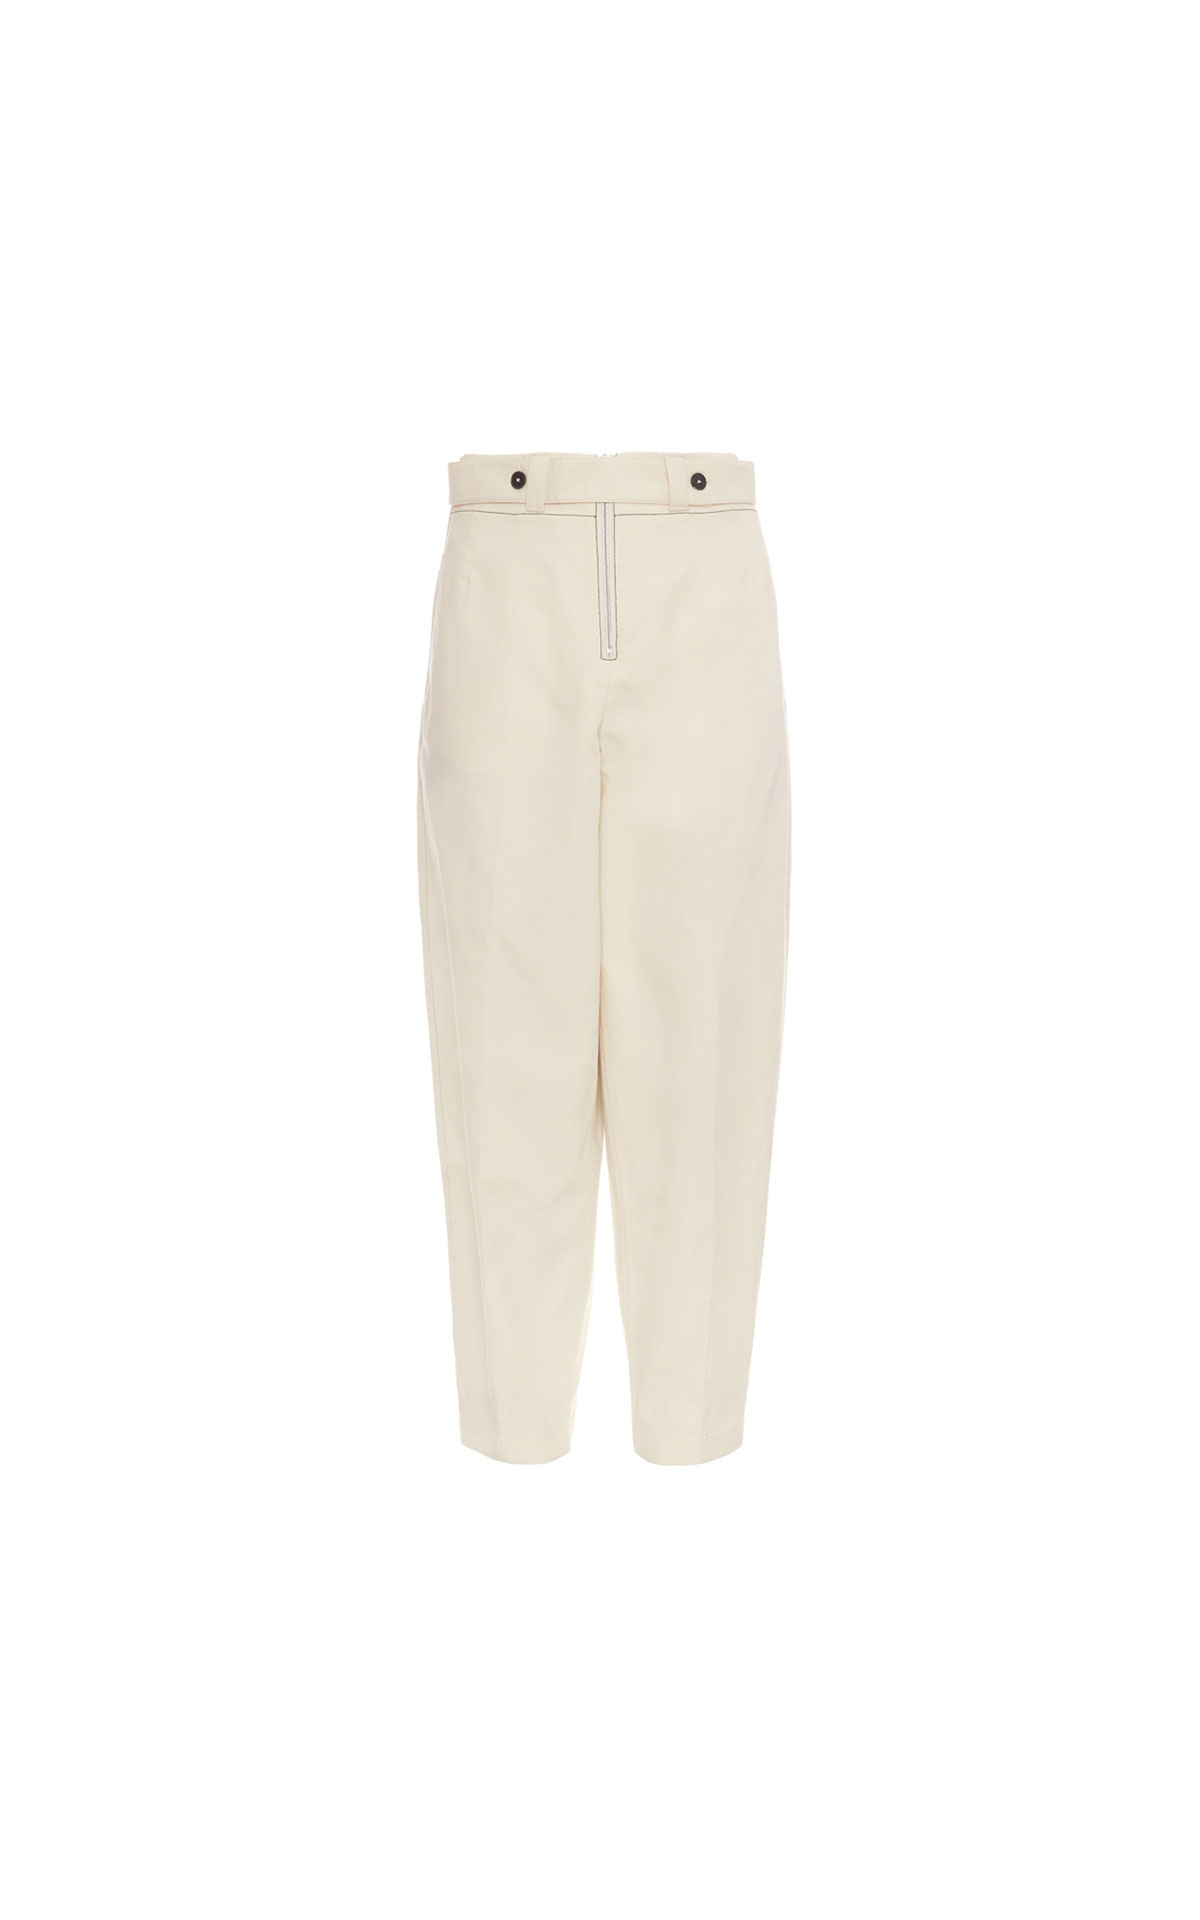 Jil Sander Belted trousers from Bicester Village